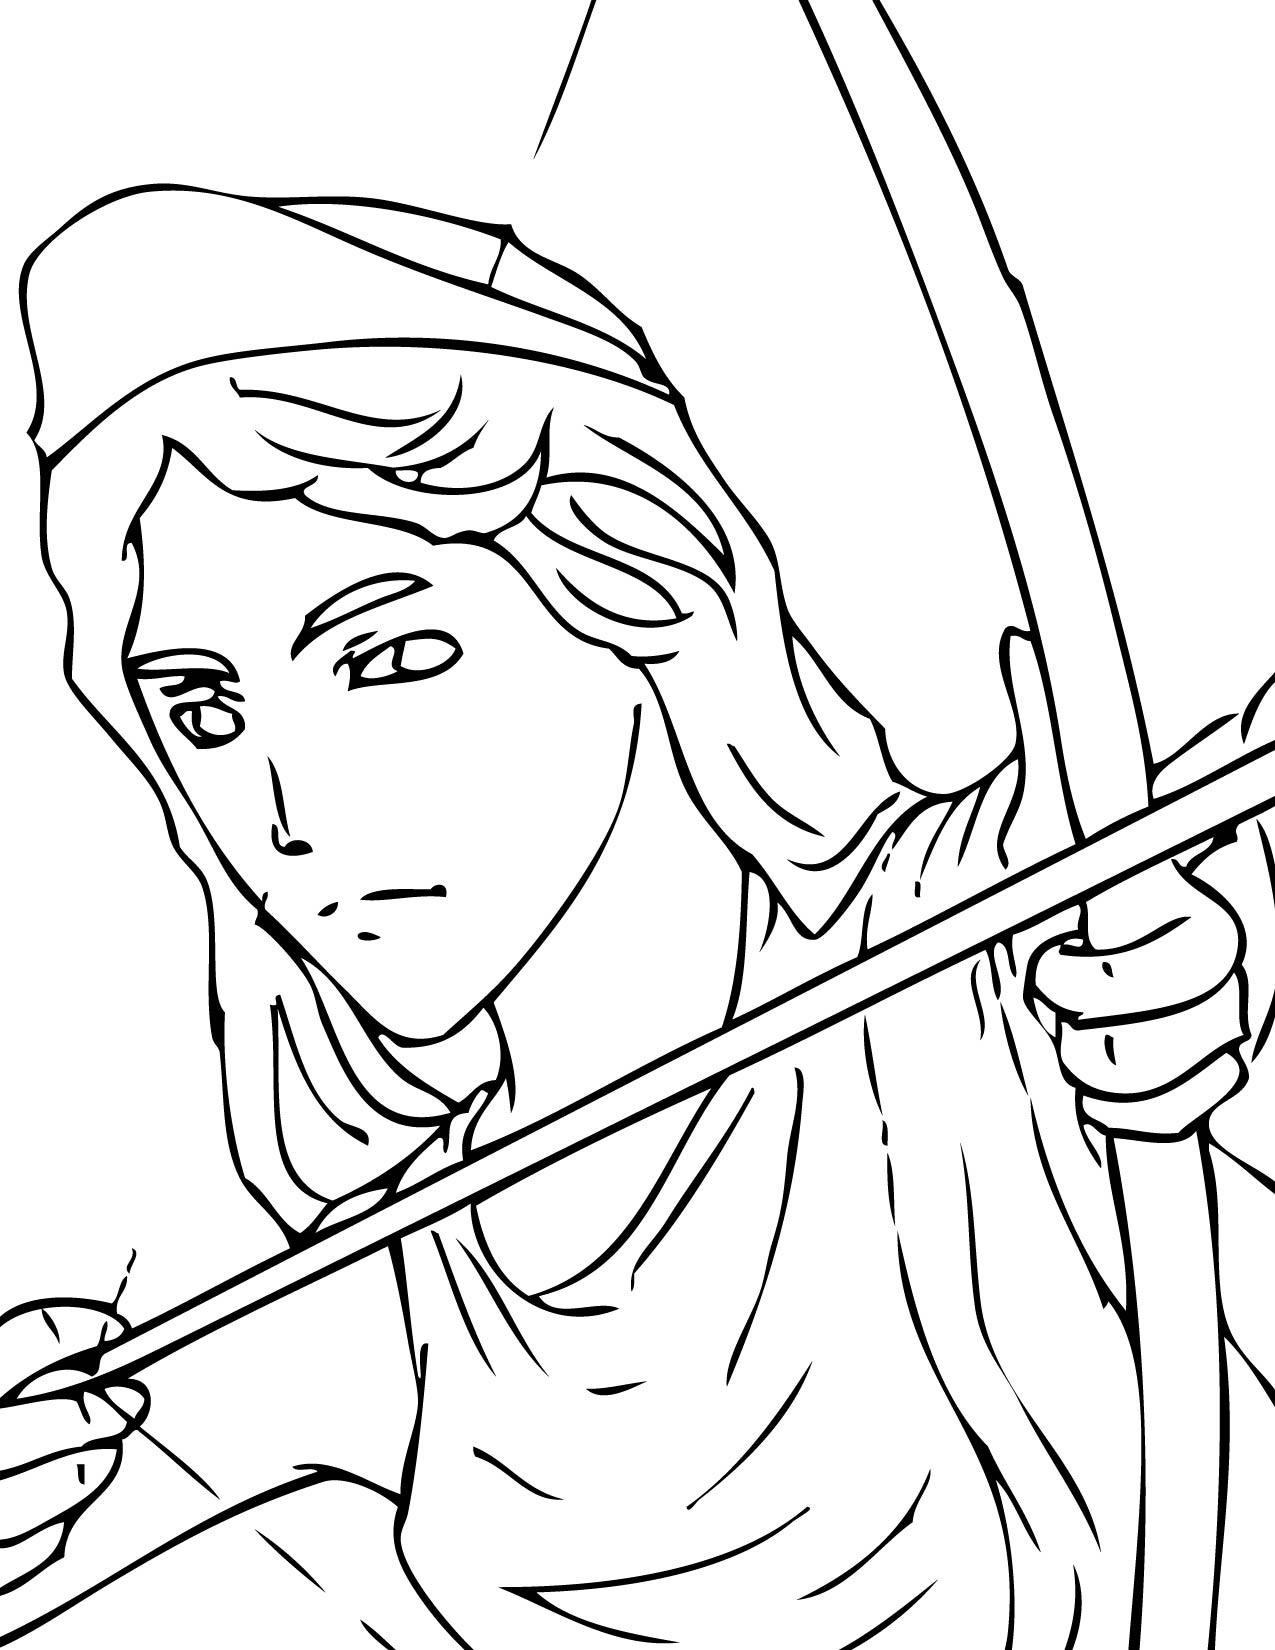 Greek Gods And Goddesses Coloring Pages at GetColorings.com | Free